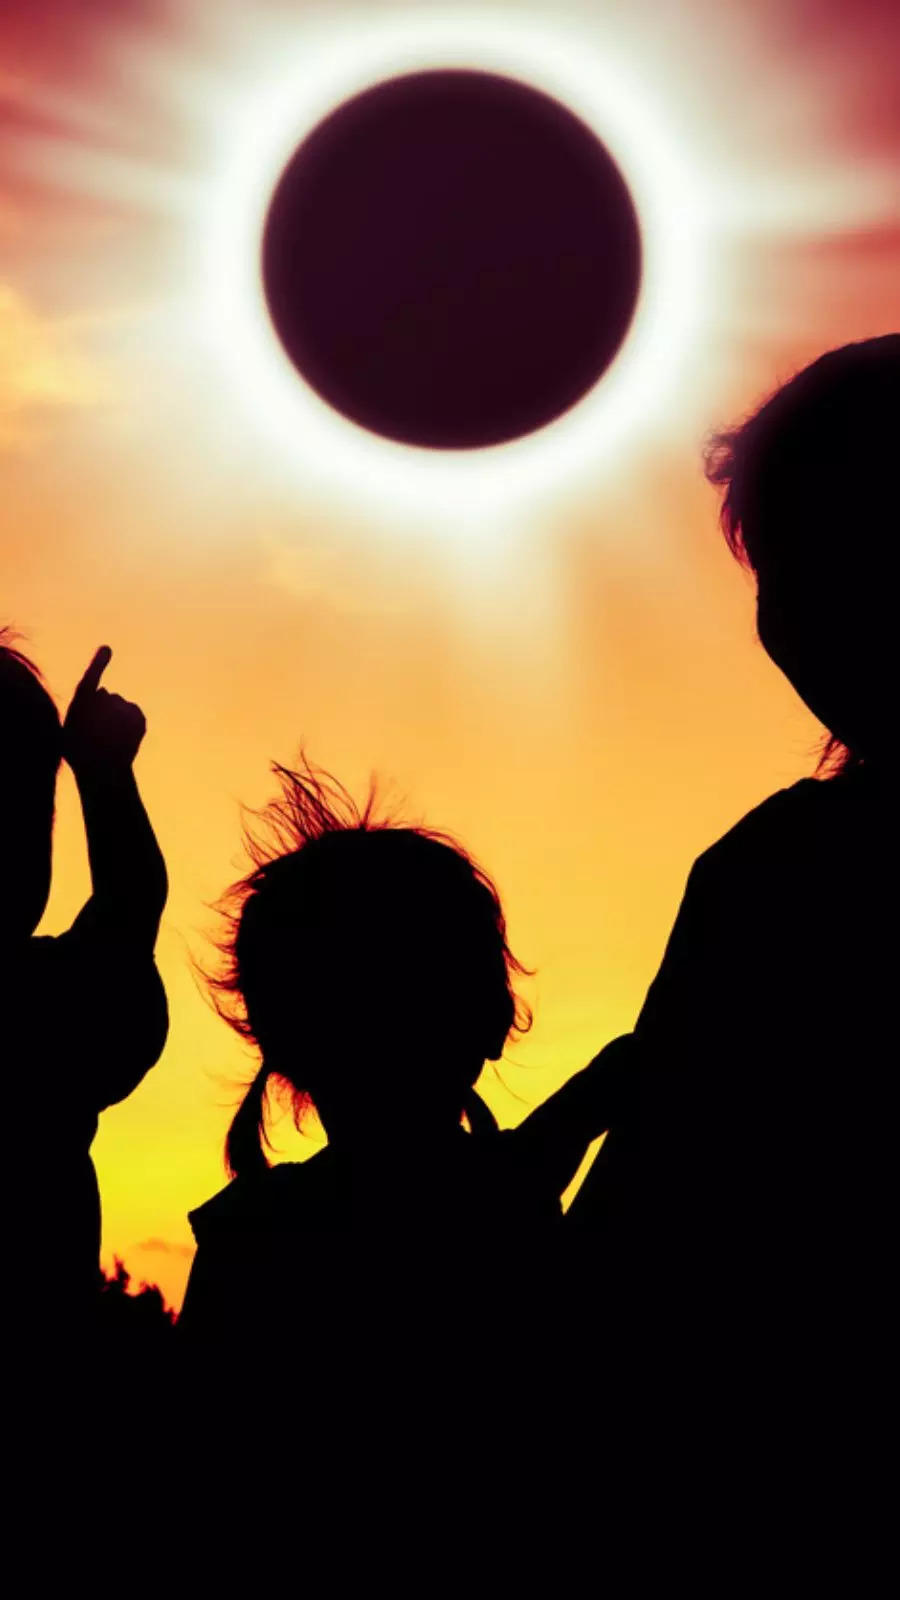 Solar eclipse on April 8: All you need to know about total solar eclipse